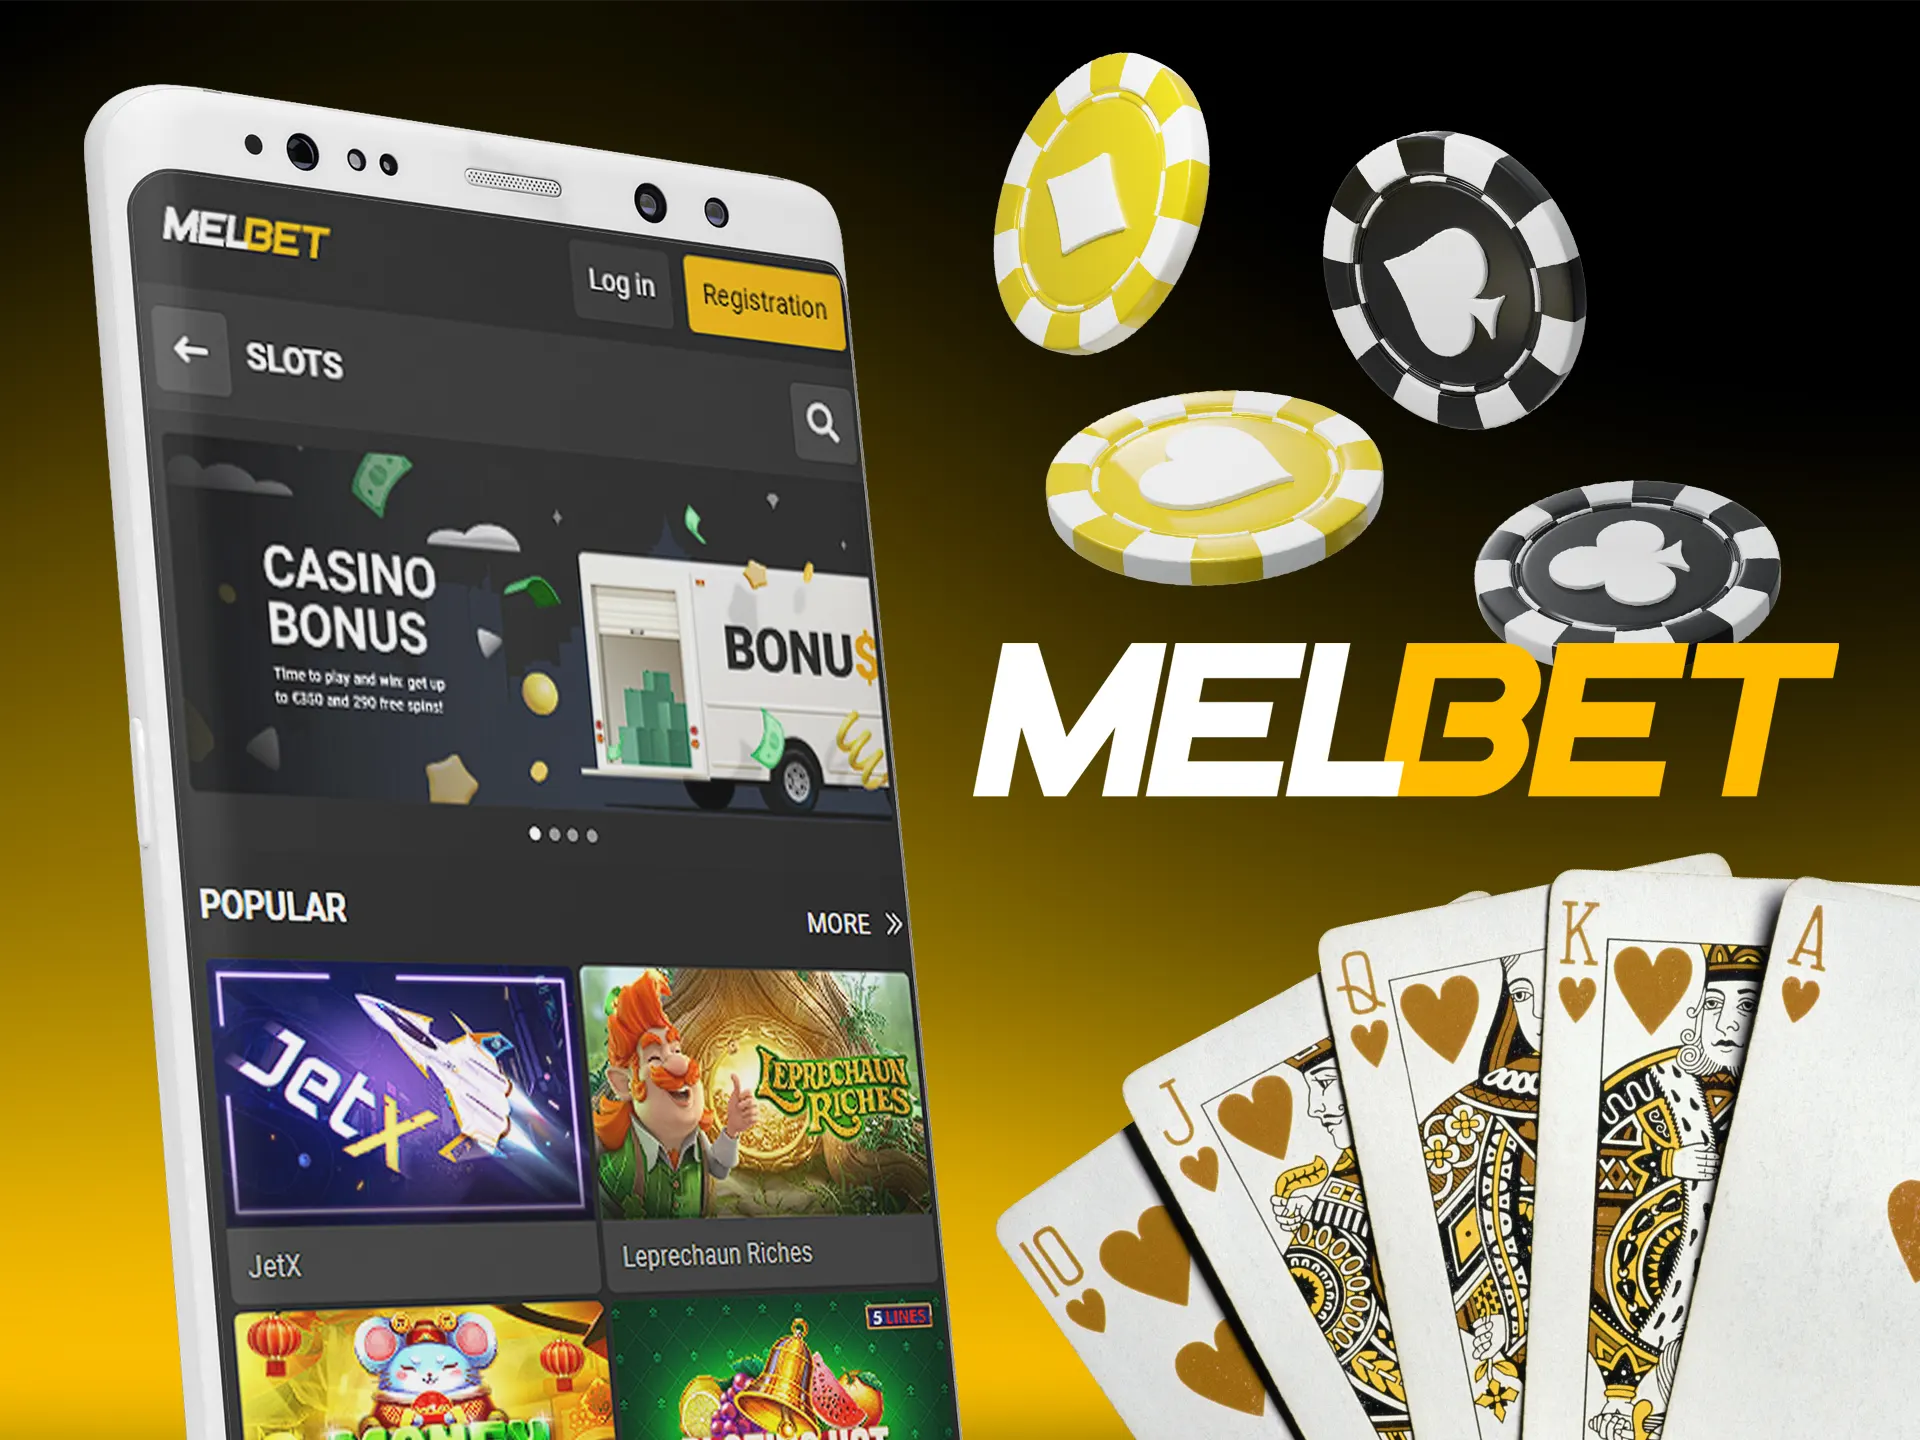 Use the Melbet app for playing casino games.